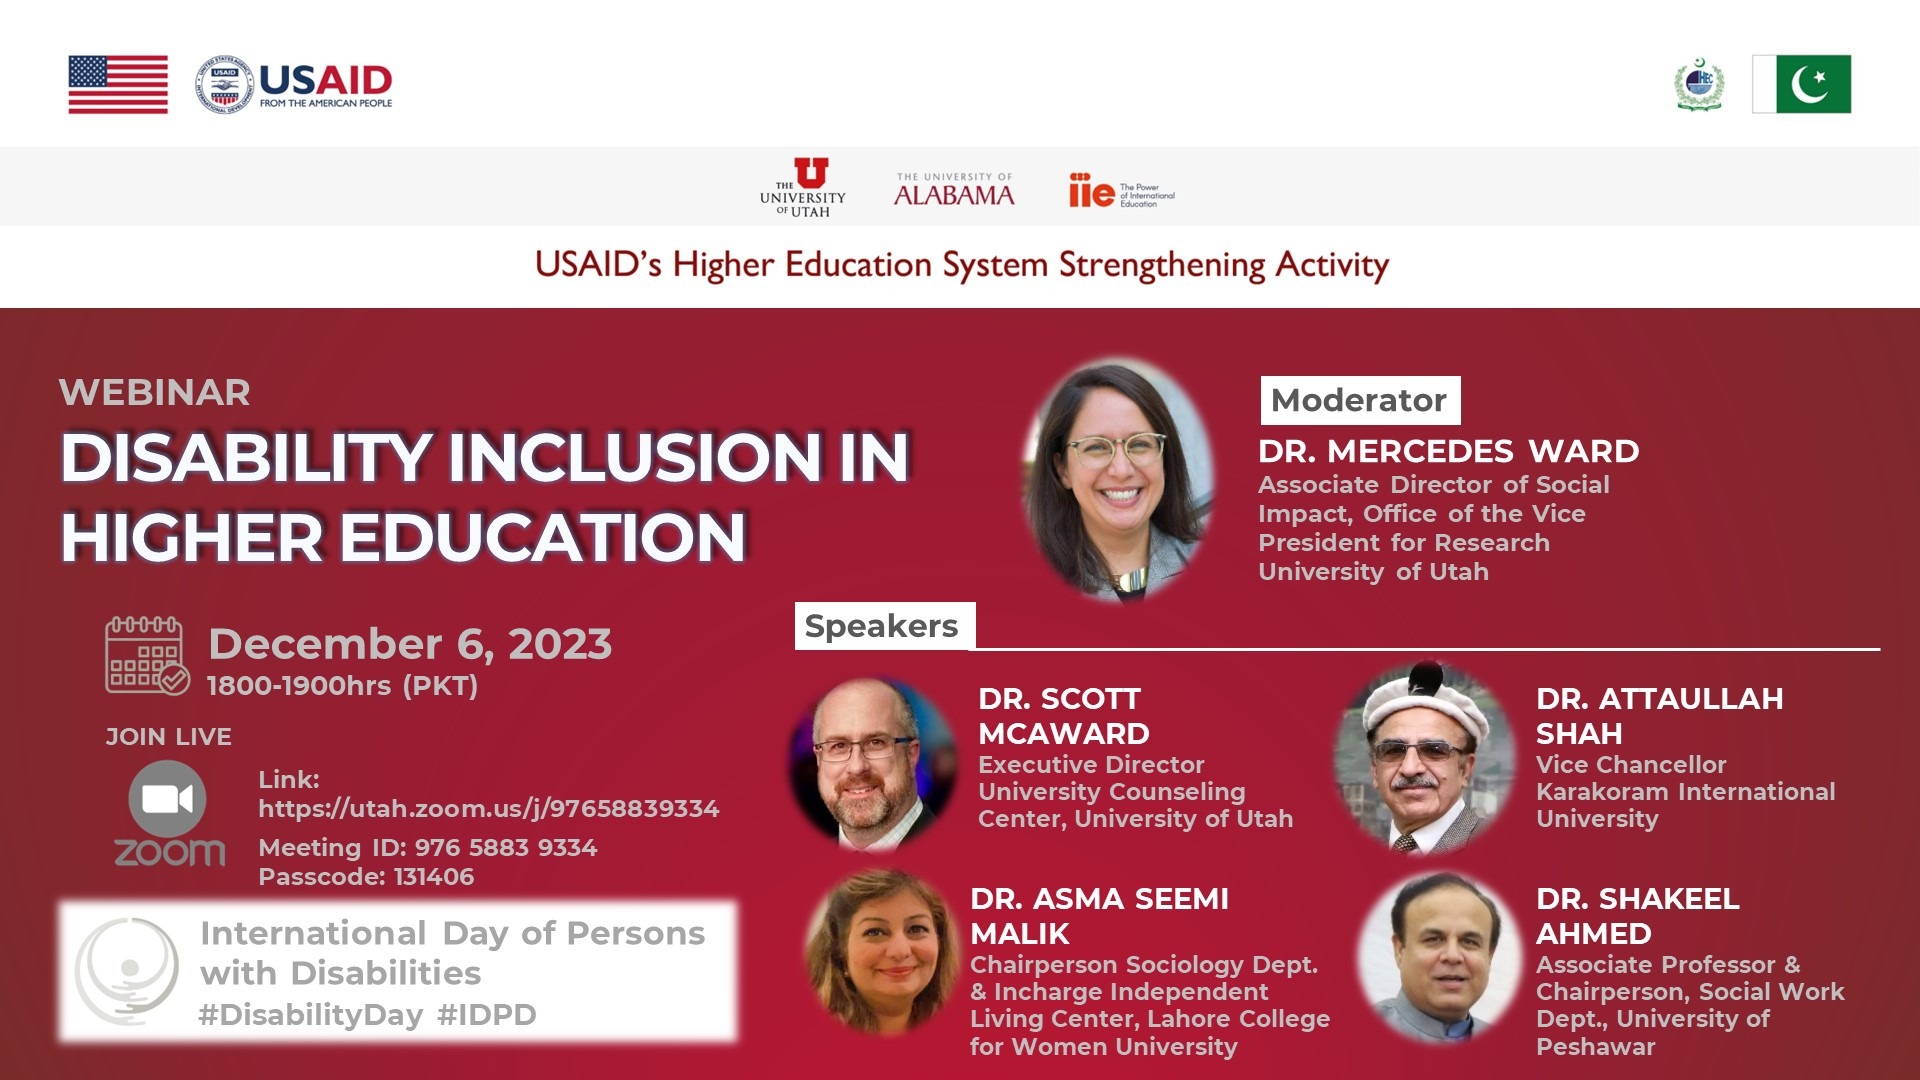 Webinar on Disability Inclusion in Higher Education